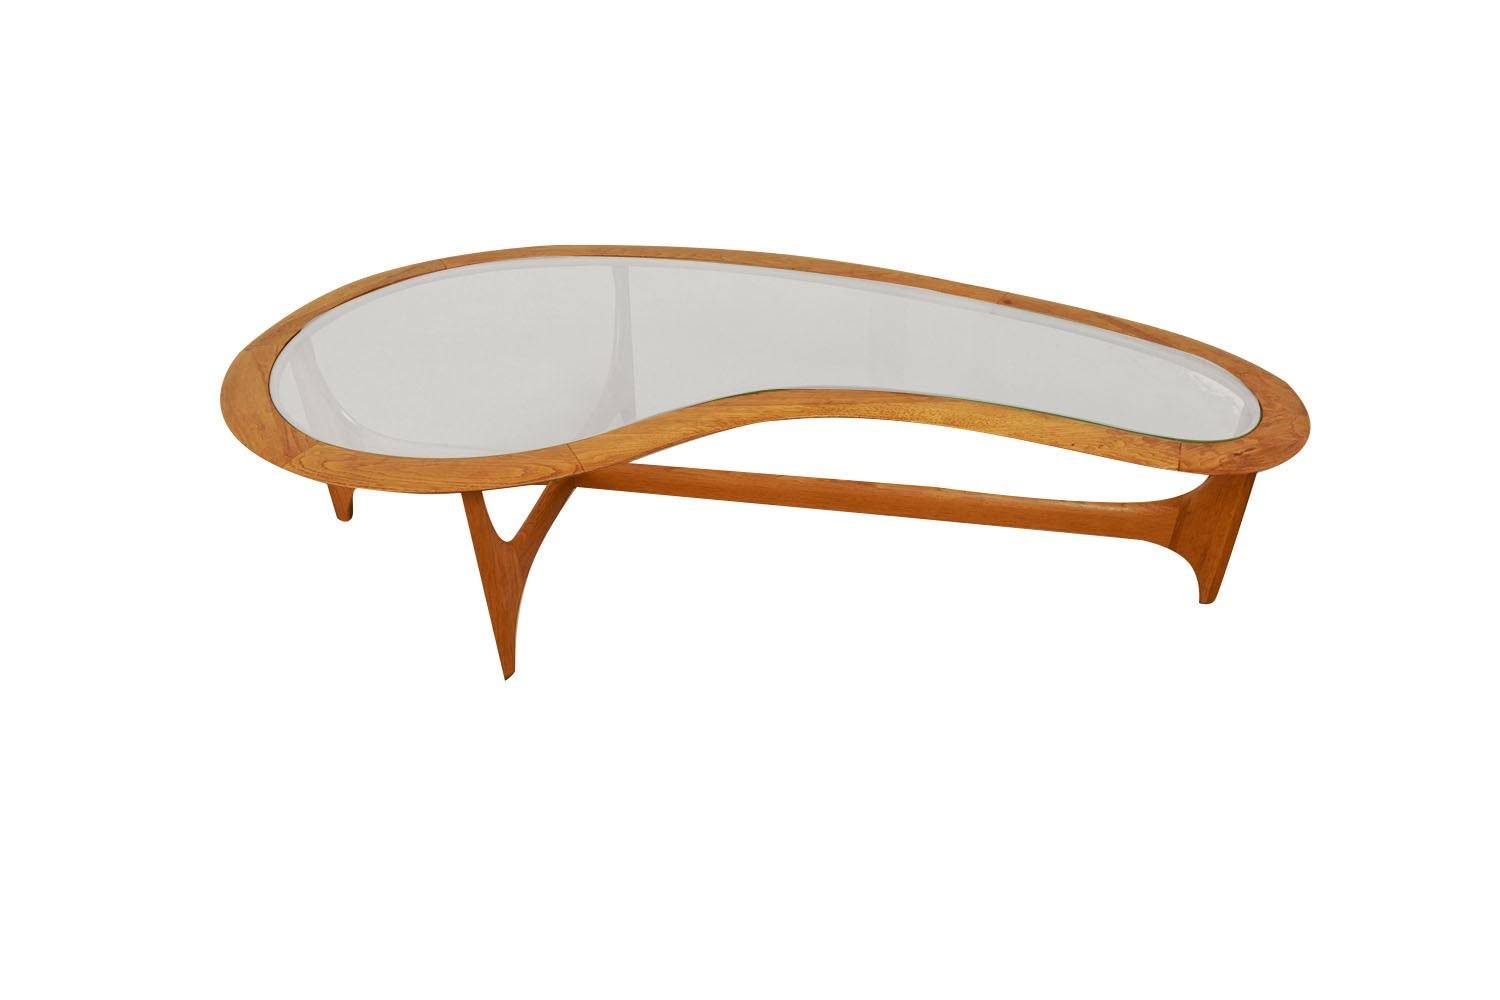 Exceptional and beautiful large, Mid-Century Modern biomorphic kidney shaped glass cocktail coffee table in the style of Adrian Pearsall, circa 1960's. Rich light walnut wood frames a kidney shaped inlay of glass. The contrast of textures between